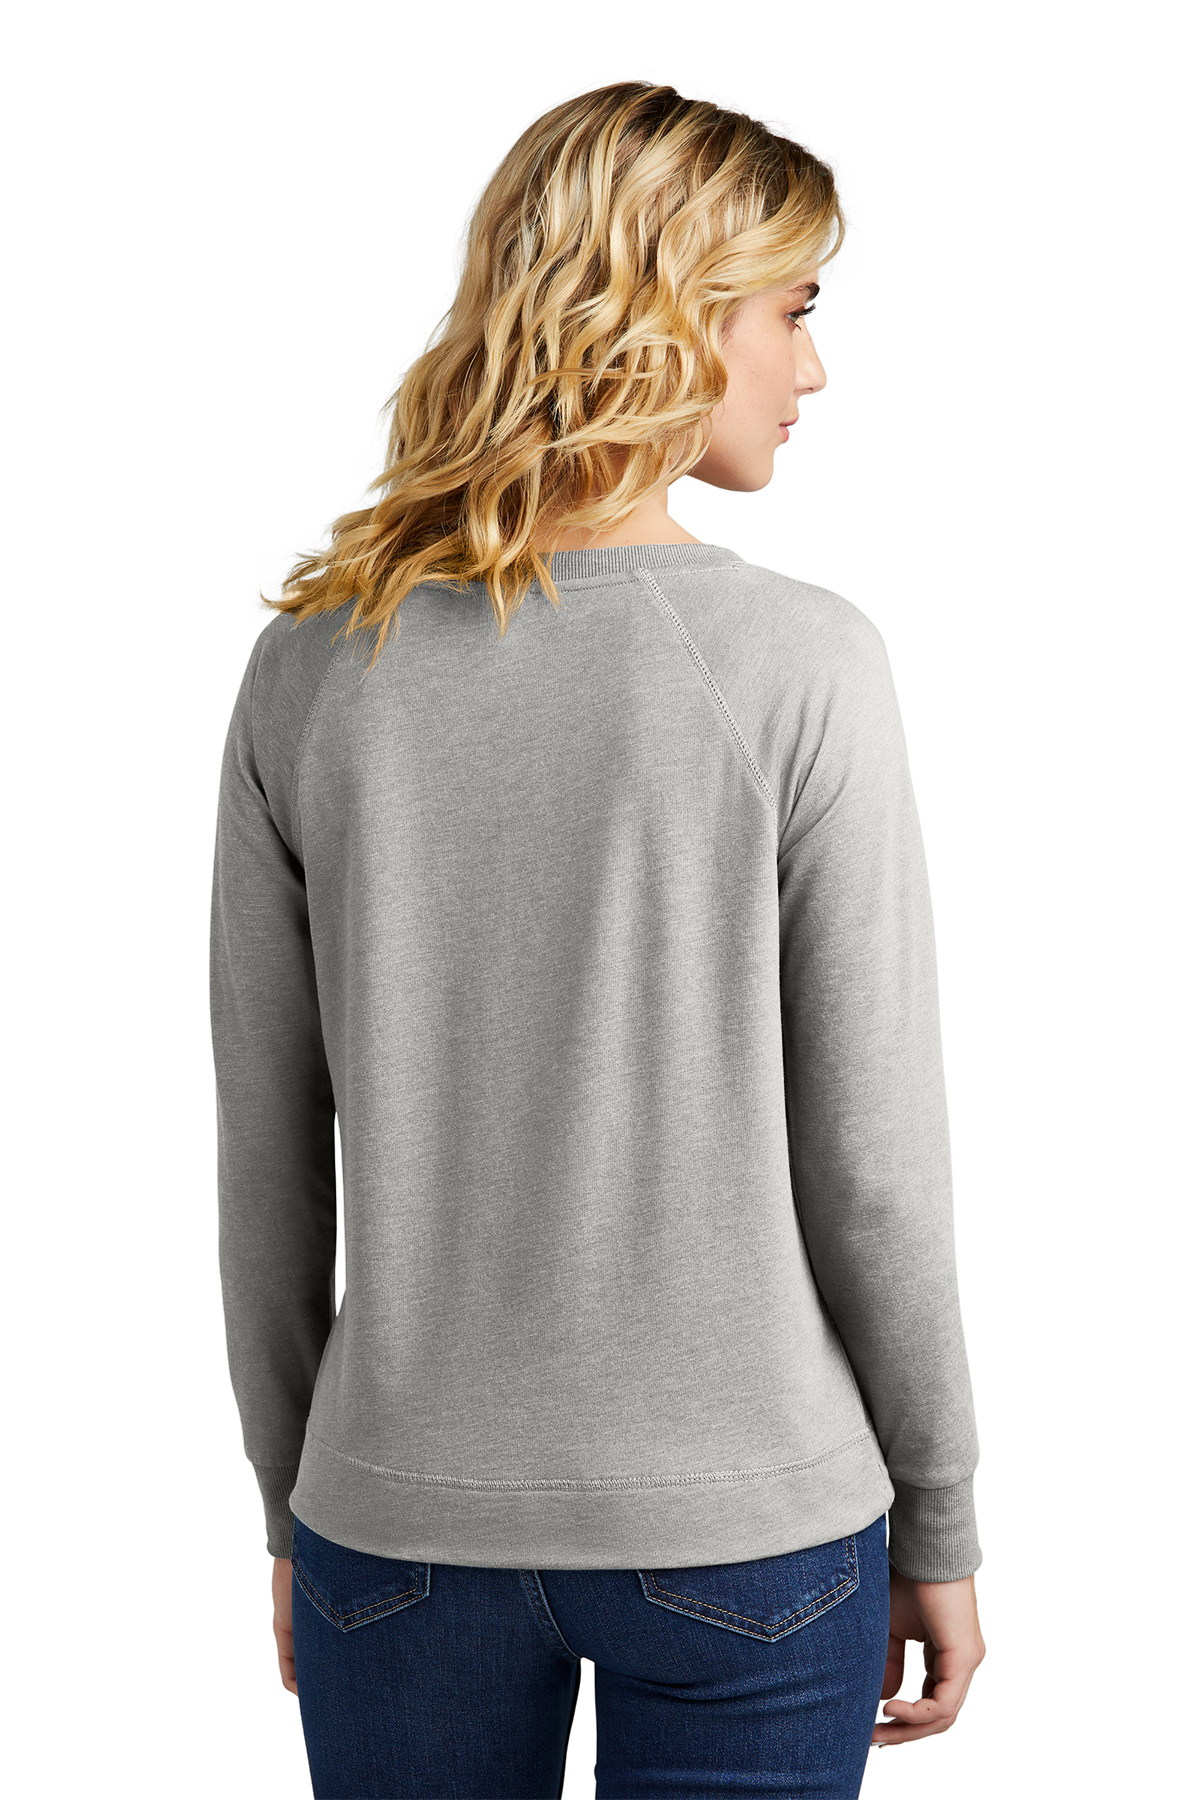 District Women’s Featherweight French Terry Long Sleeve Crewneck ...